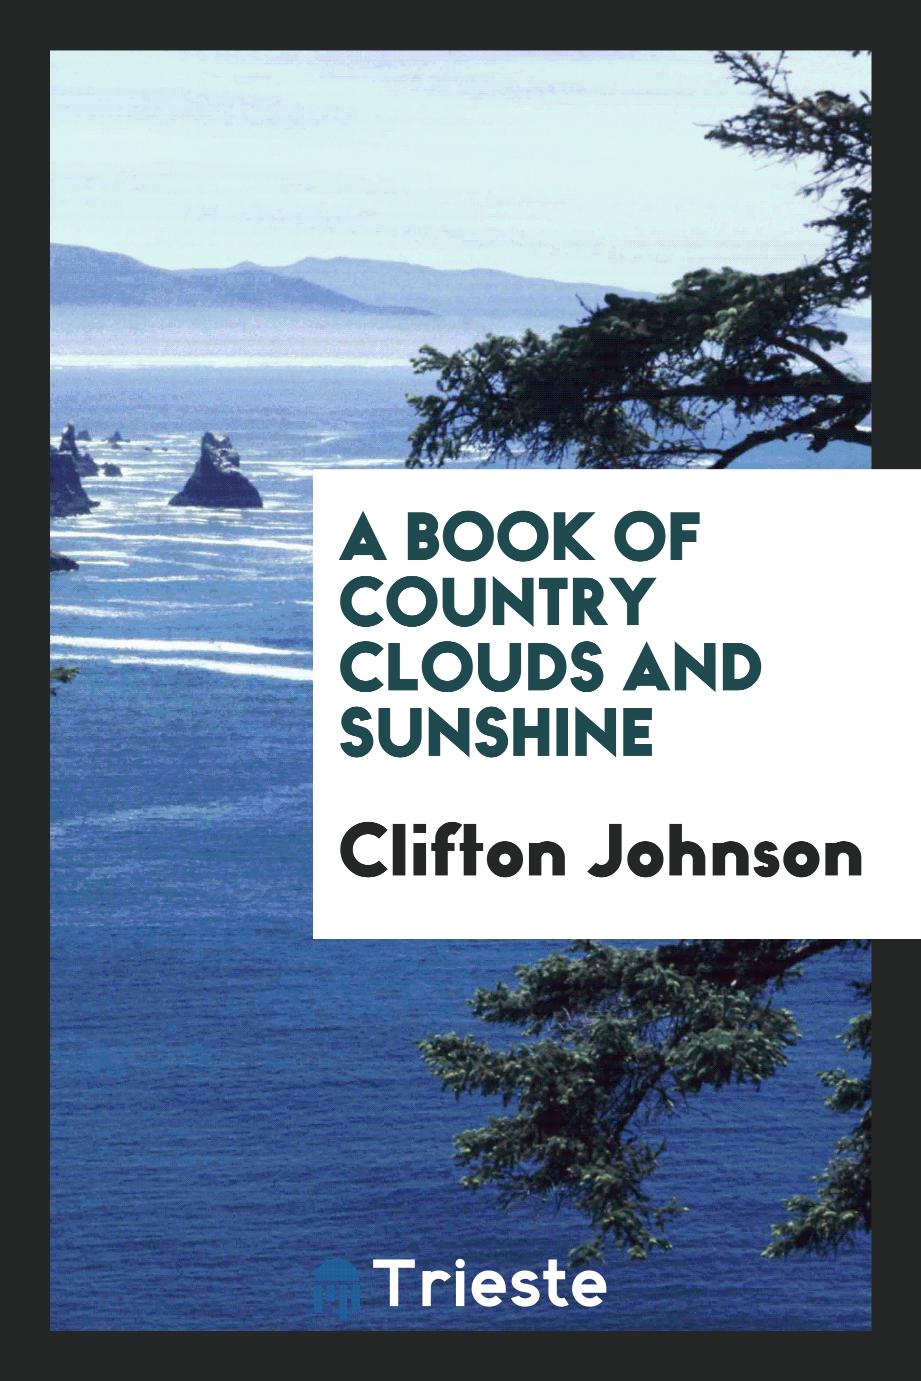 A book of country clouds and sunshine